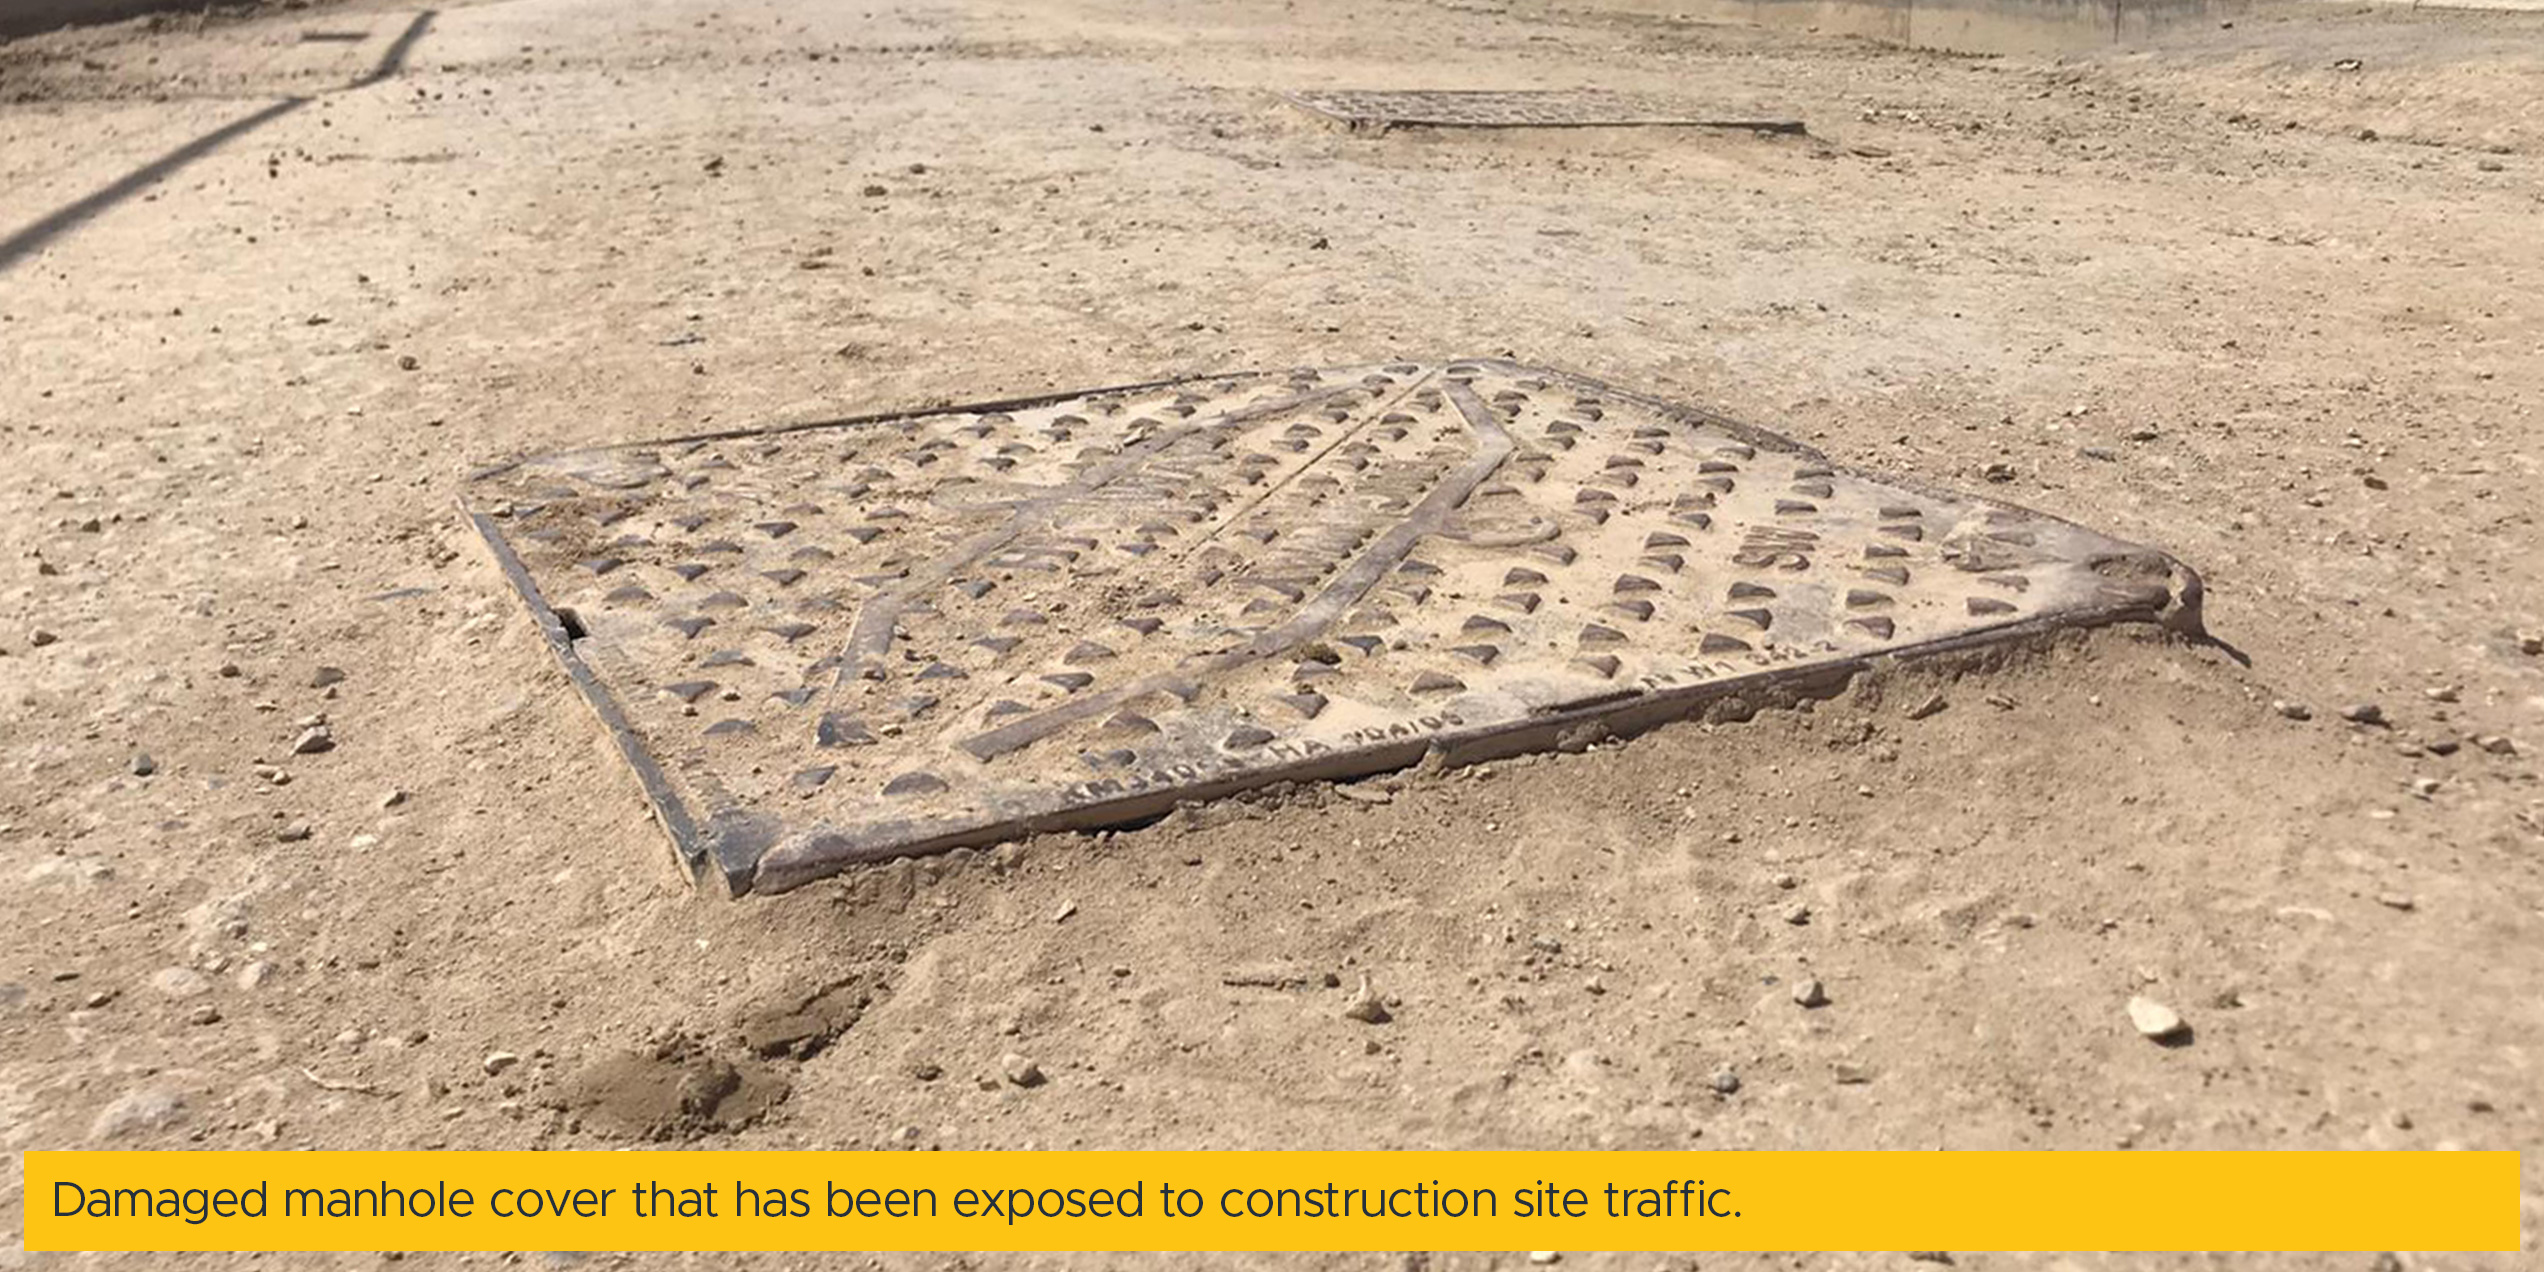 Damaged manhole cover that has been exposed to construction site traffic